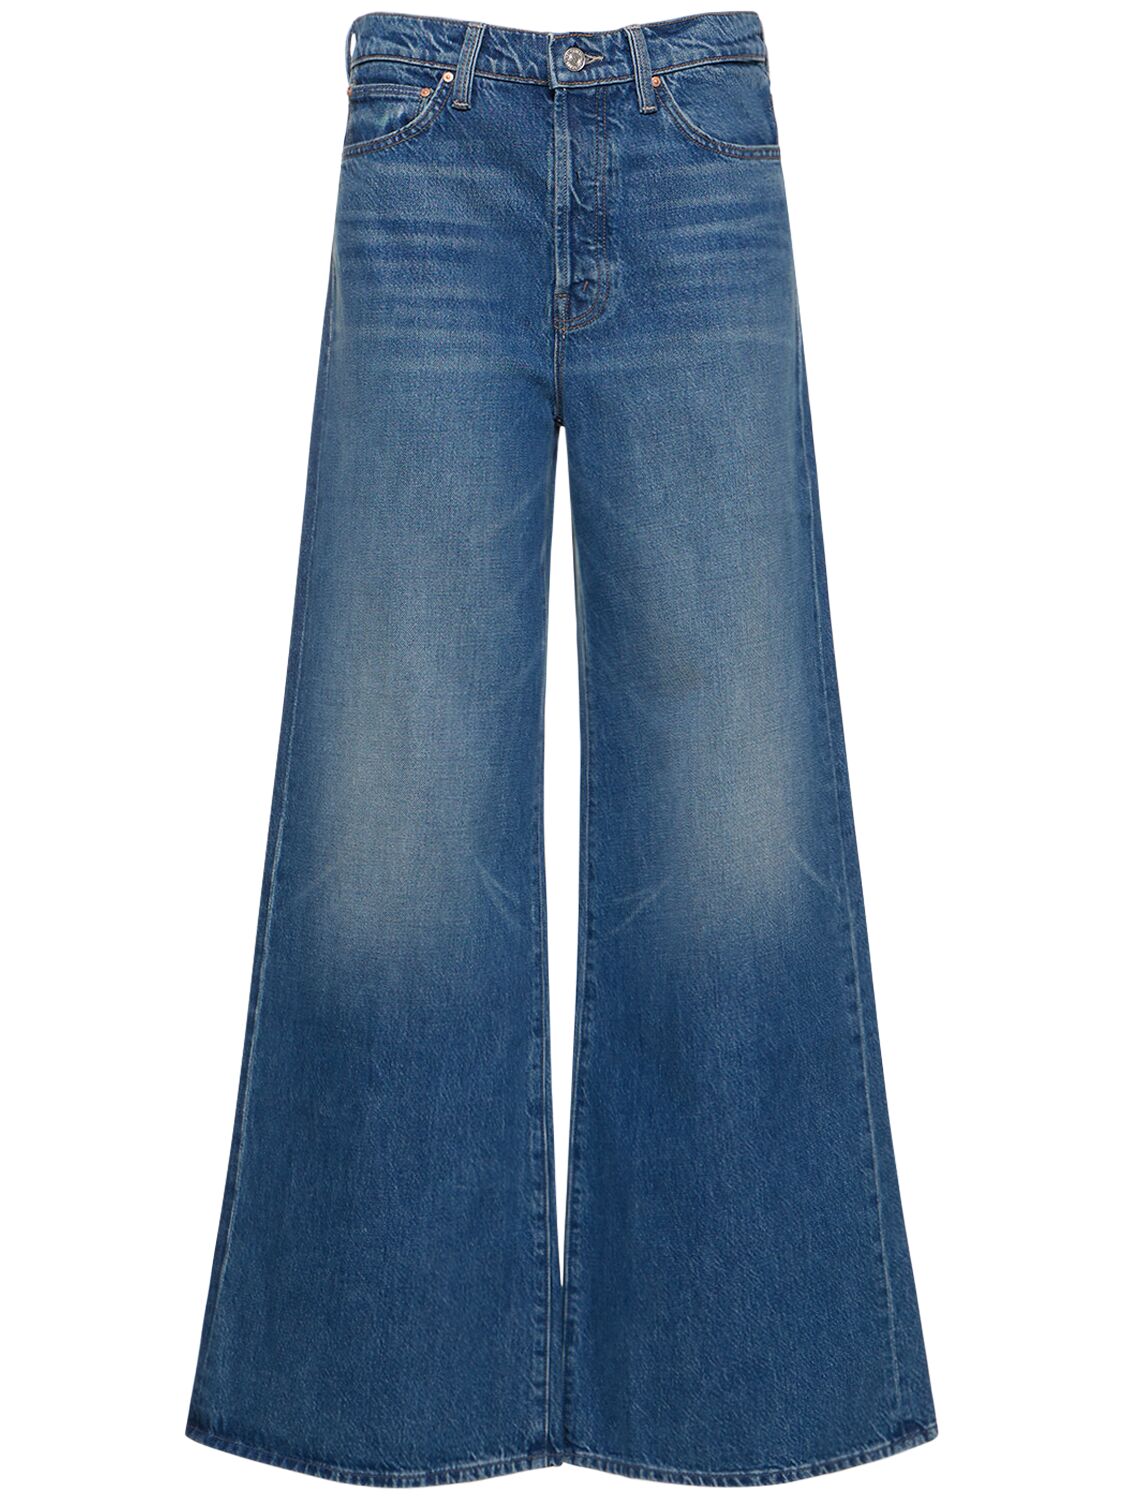 The Ditcher Roller High Rise Cotton Jean